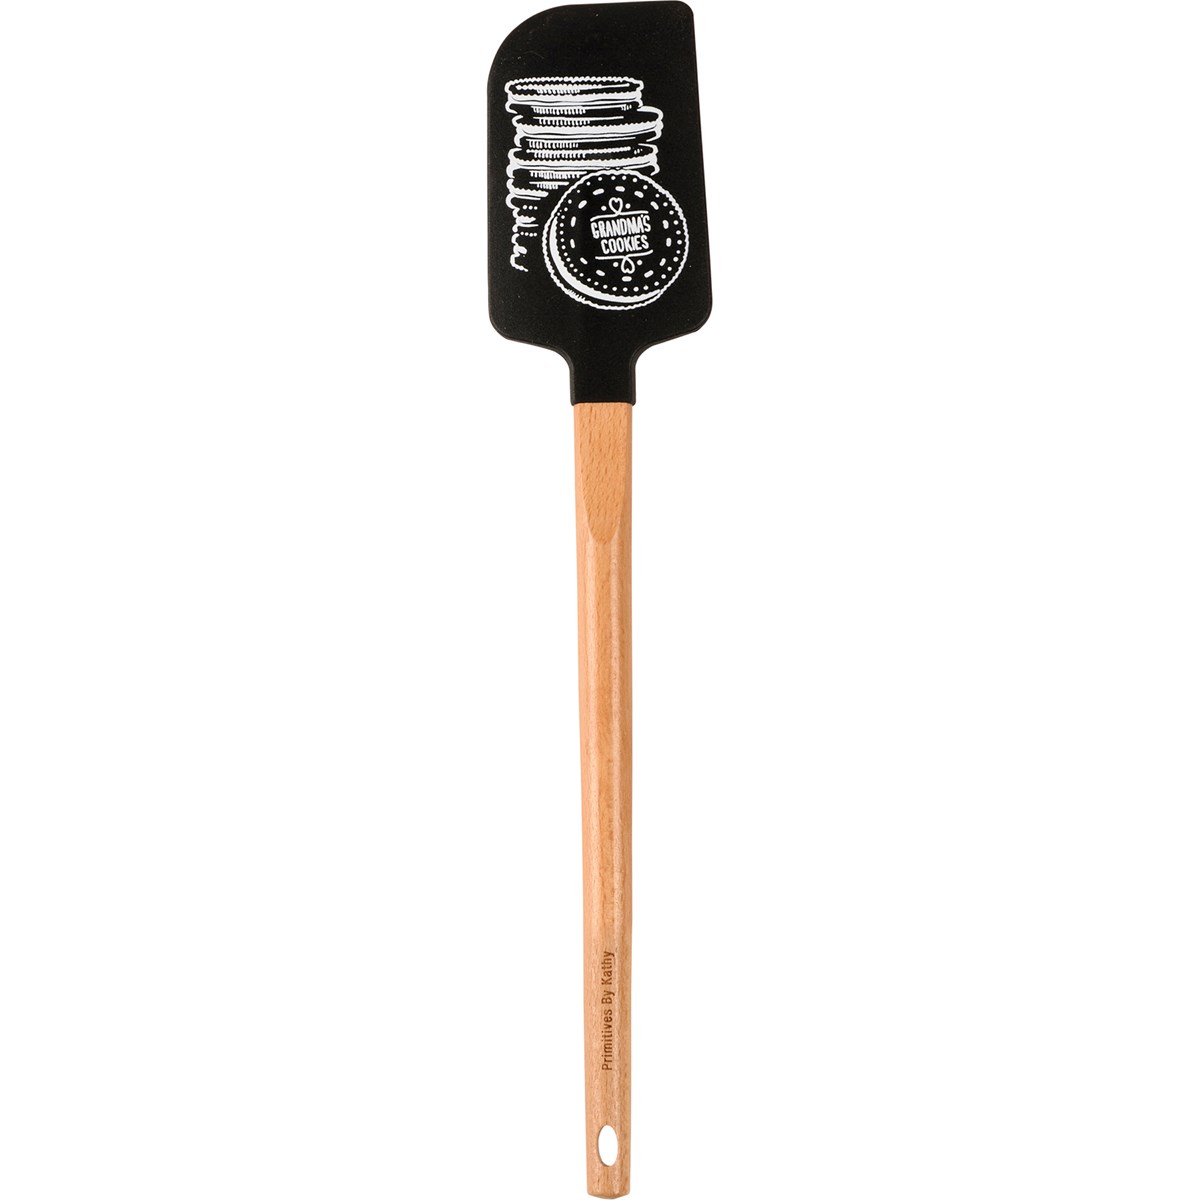 One Cookie At A Time Spatula - Silicone, Wood